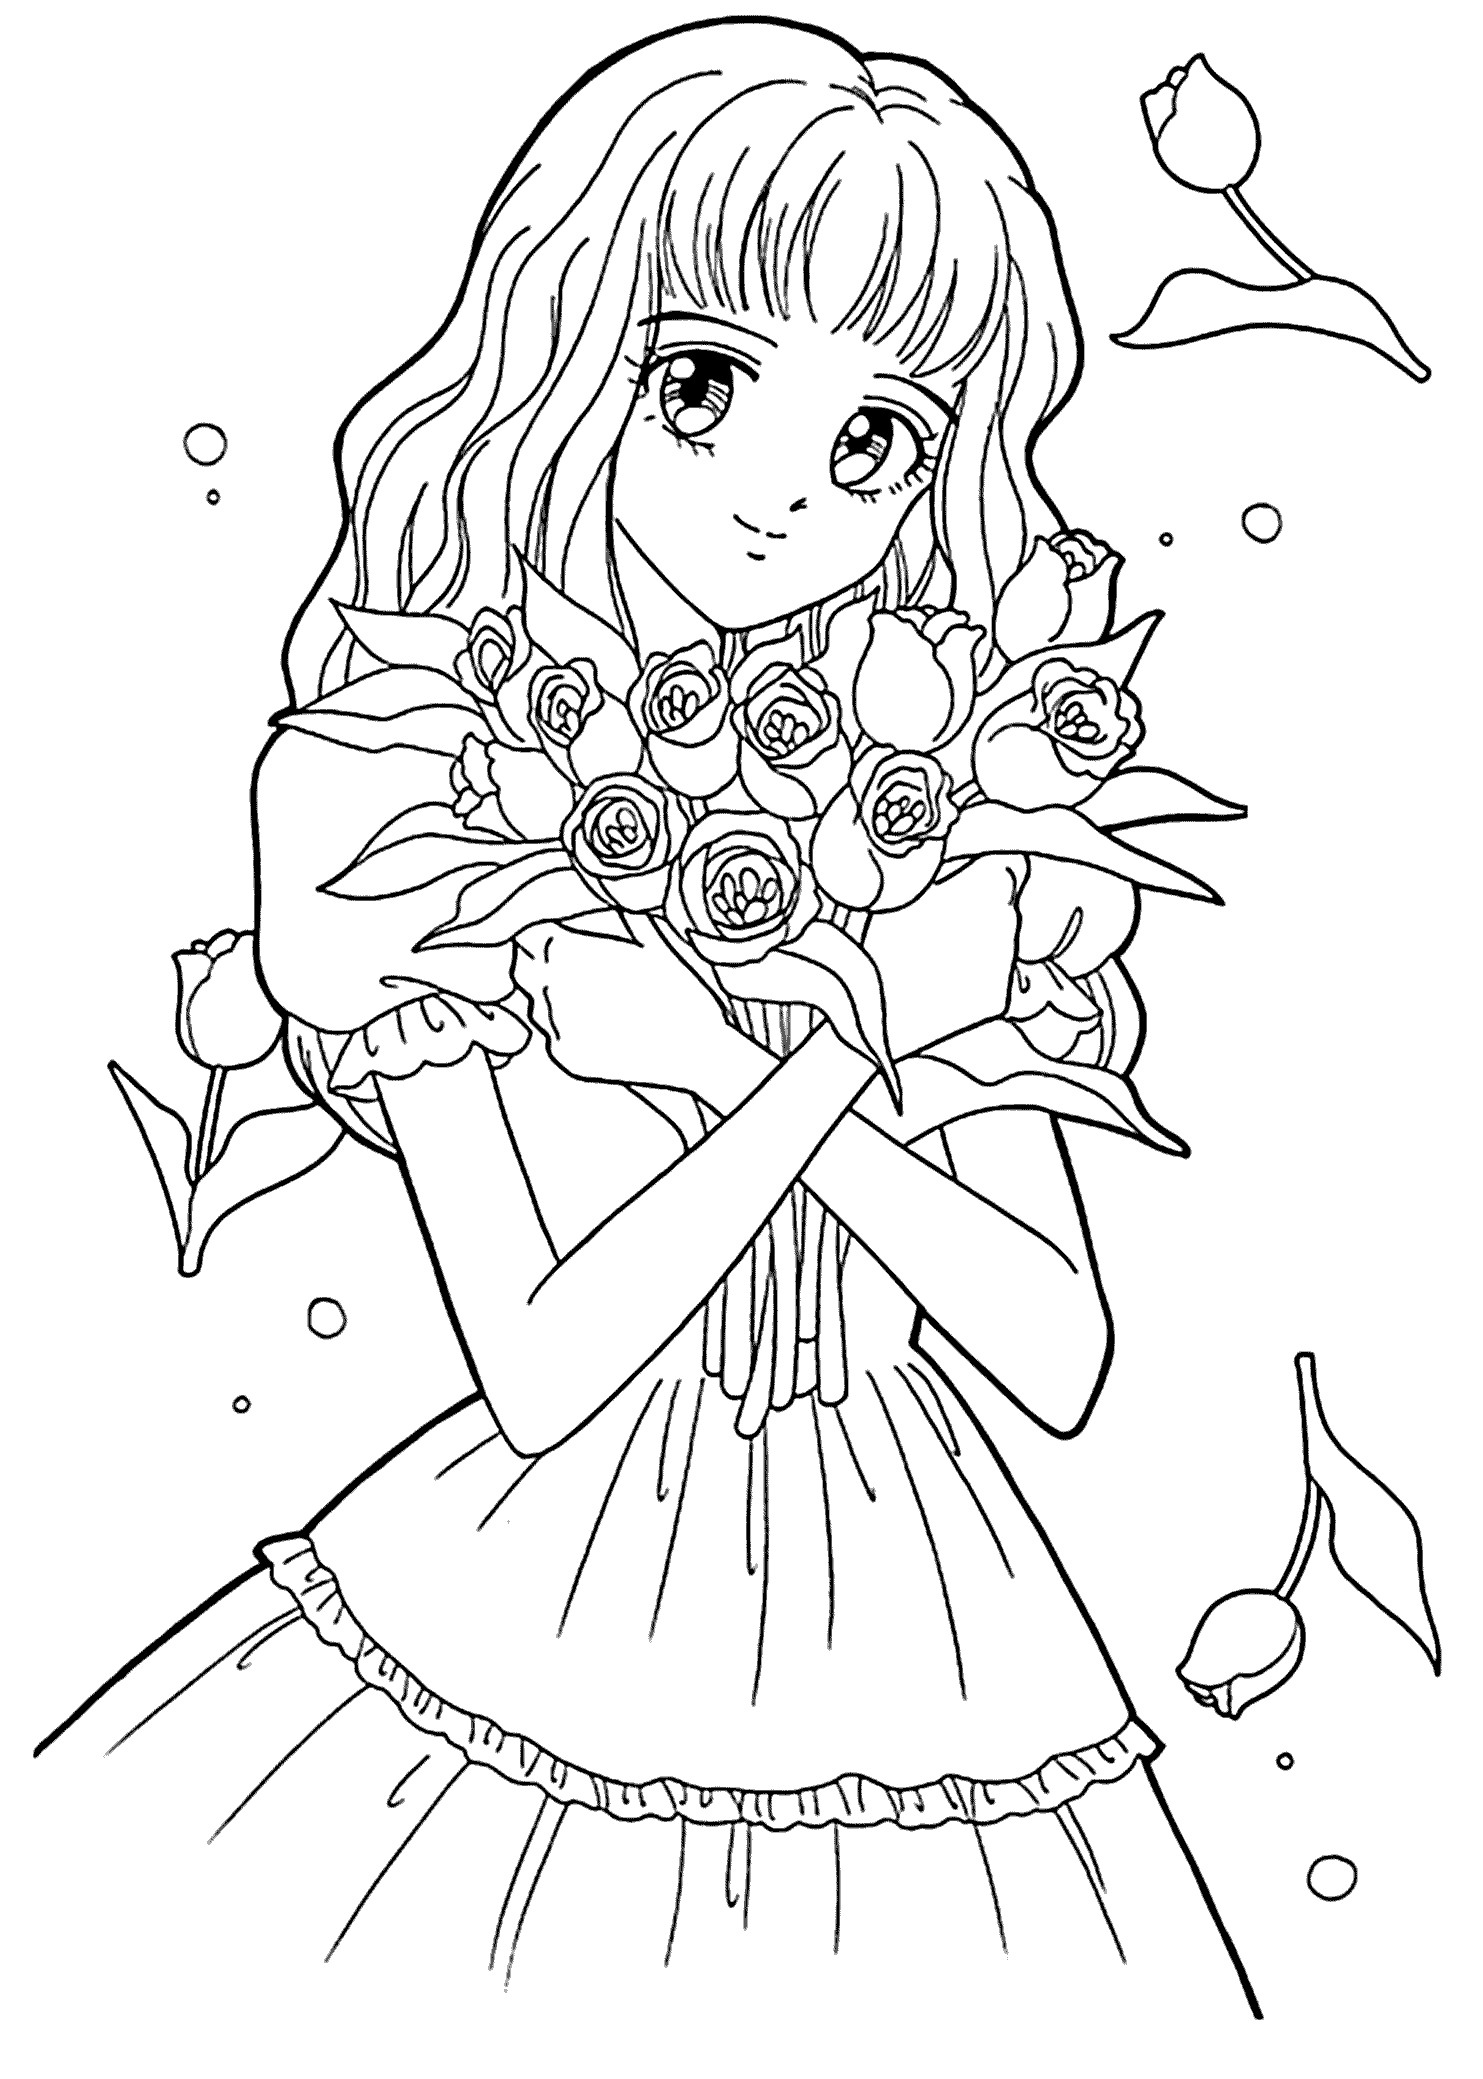 Easy Anime Coloring Pages For Kids
 13 Best of Anime Girl Coloring Pages Bestofcoloring